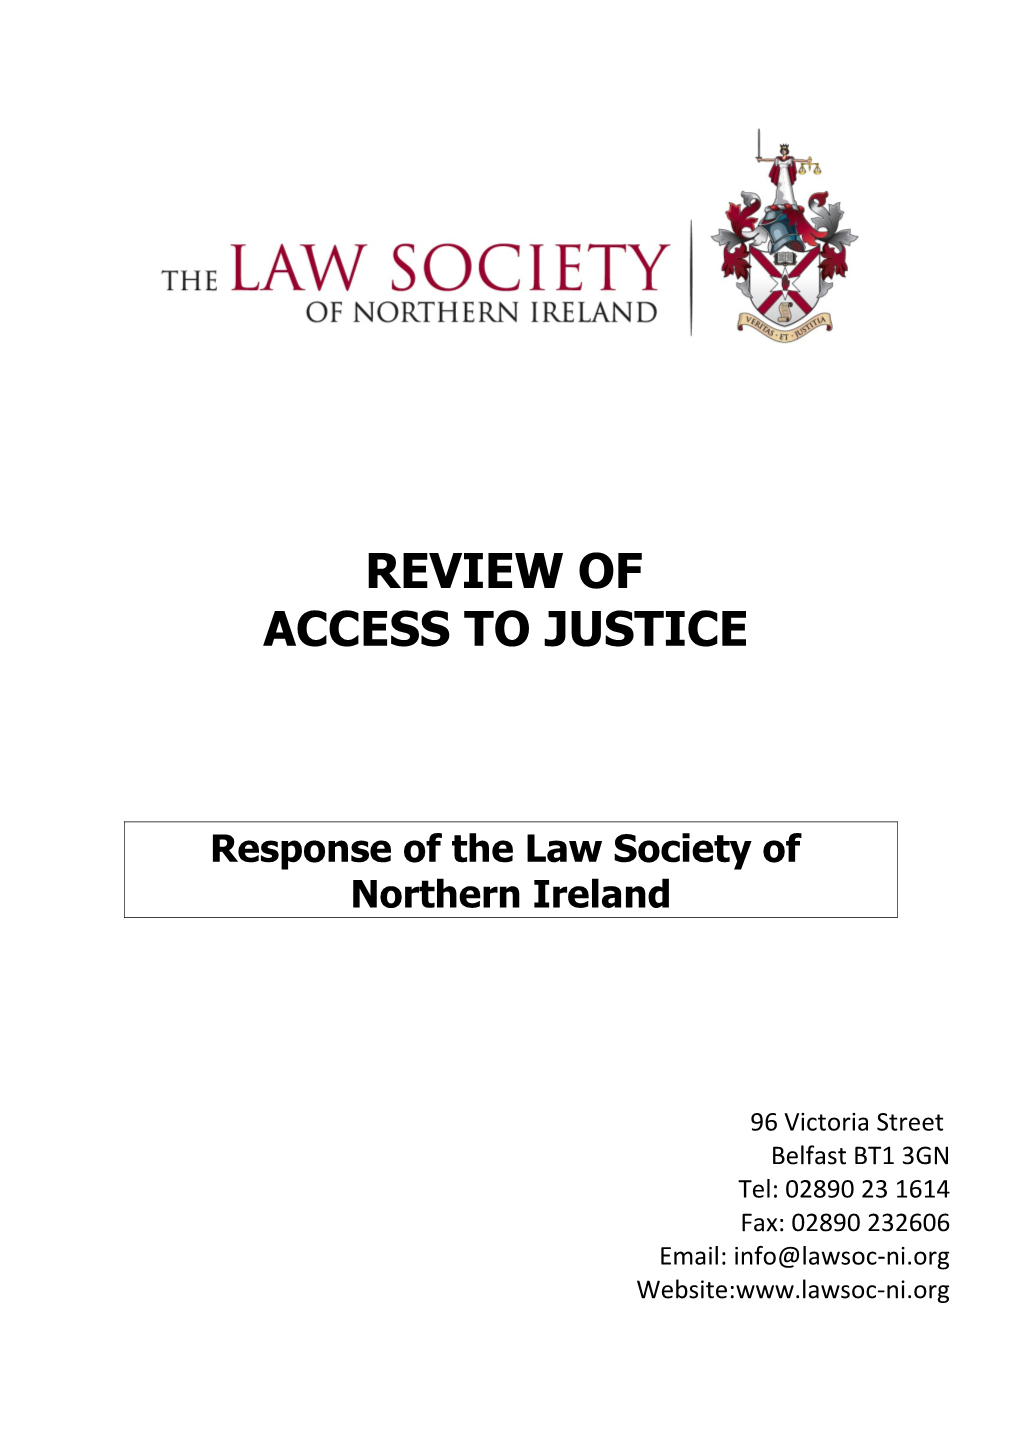 Response of the Law Society Of